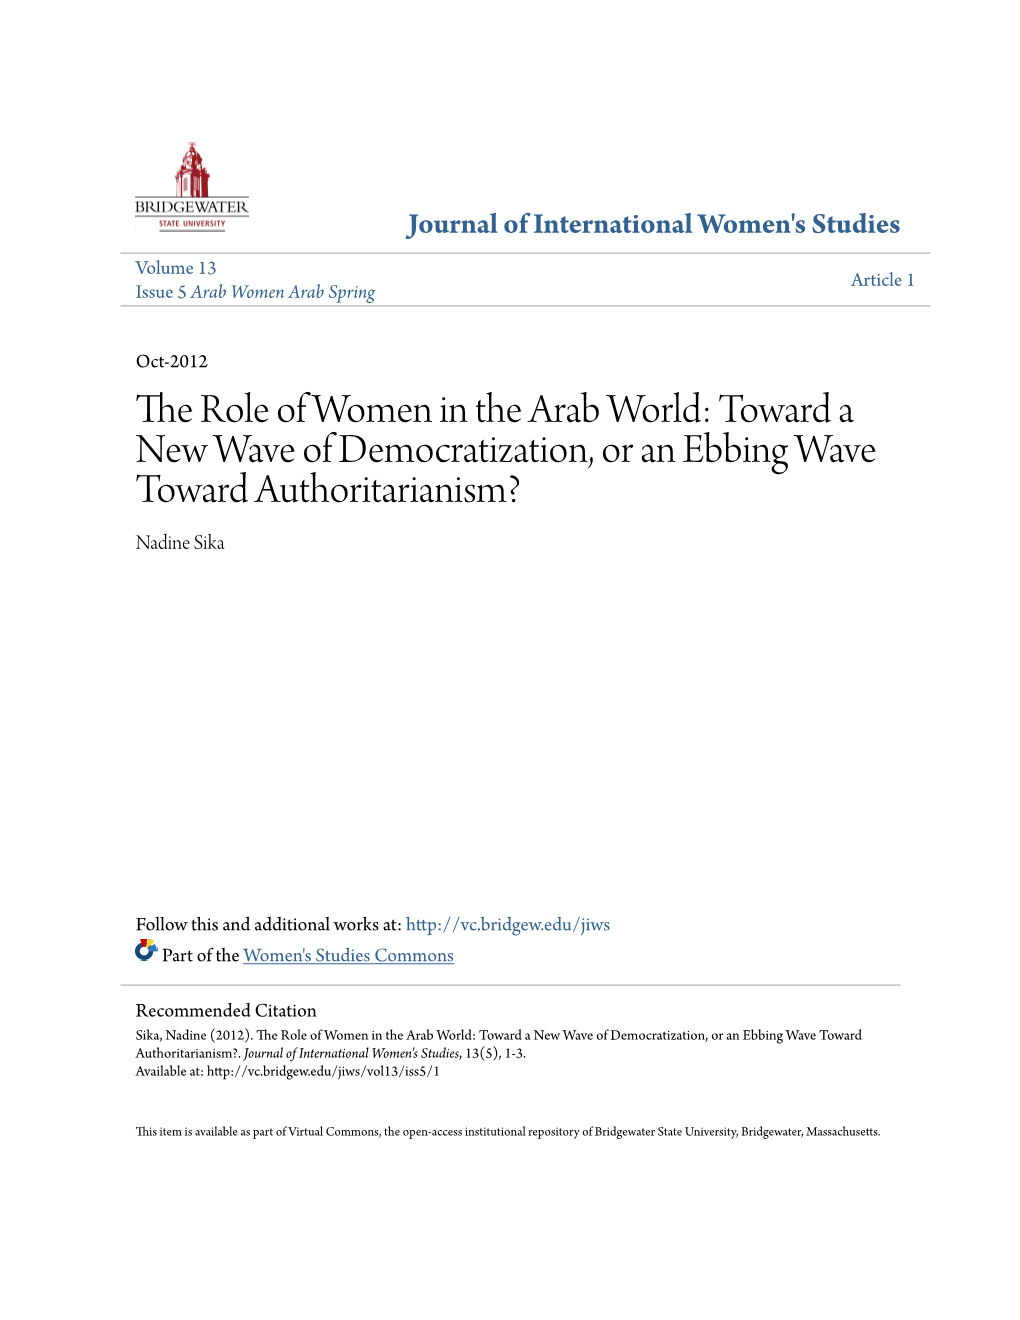 The Role of Women in the Arab World: Toward a New Wave of Democratization, Or an Ebbing Wave Toward Authoritarianism? Nadine Sika